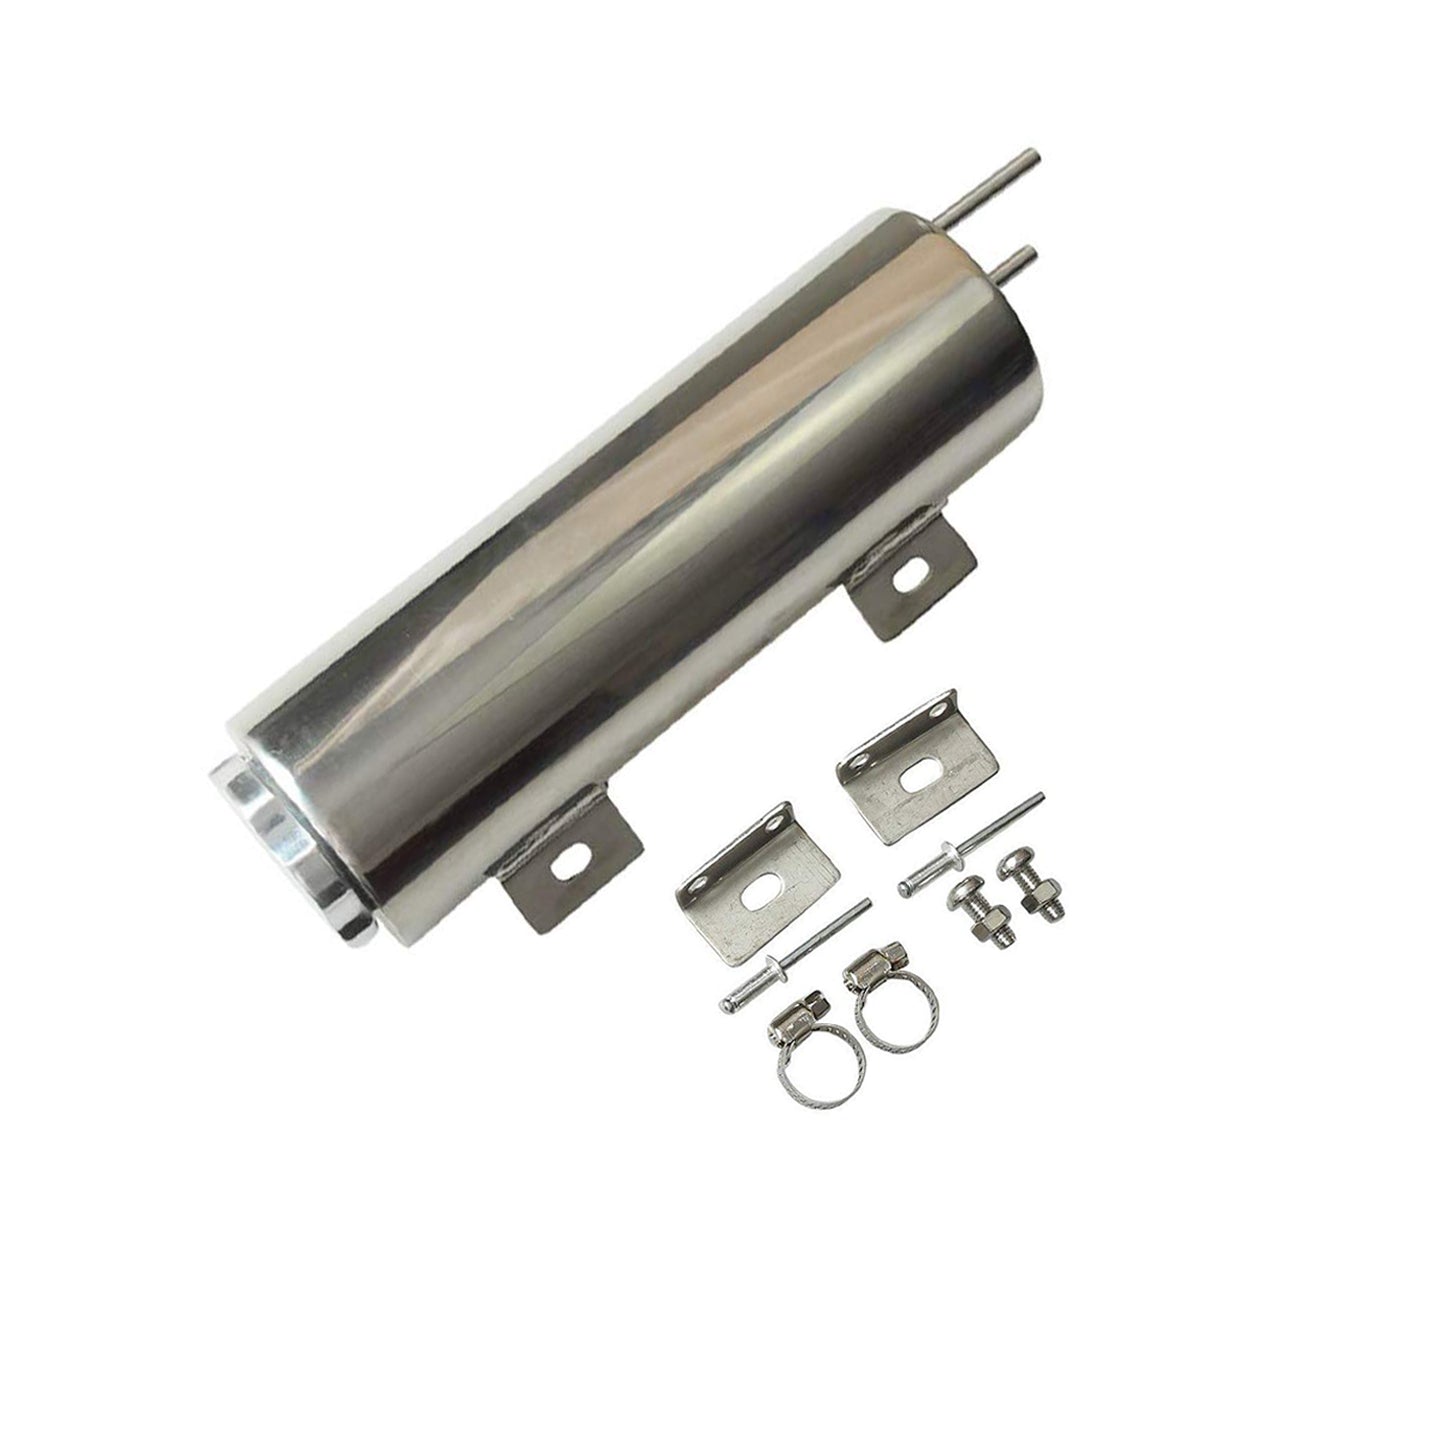 3"X 9" Inch Stainless Radiator Overflow Tank Universal Fit.